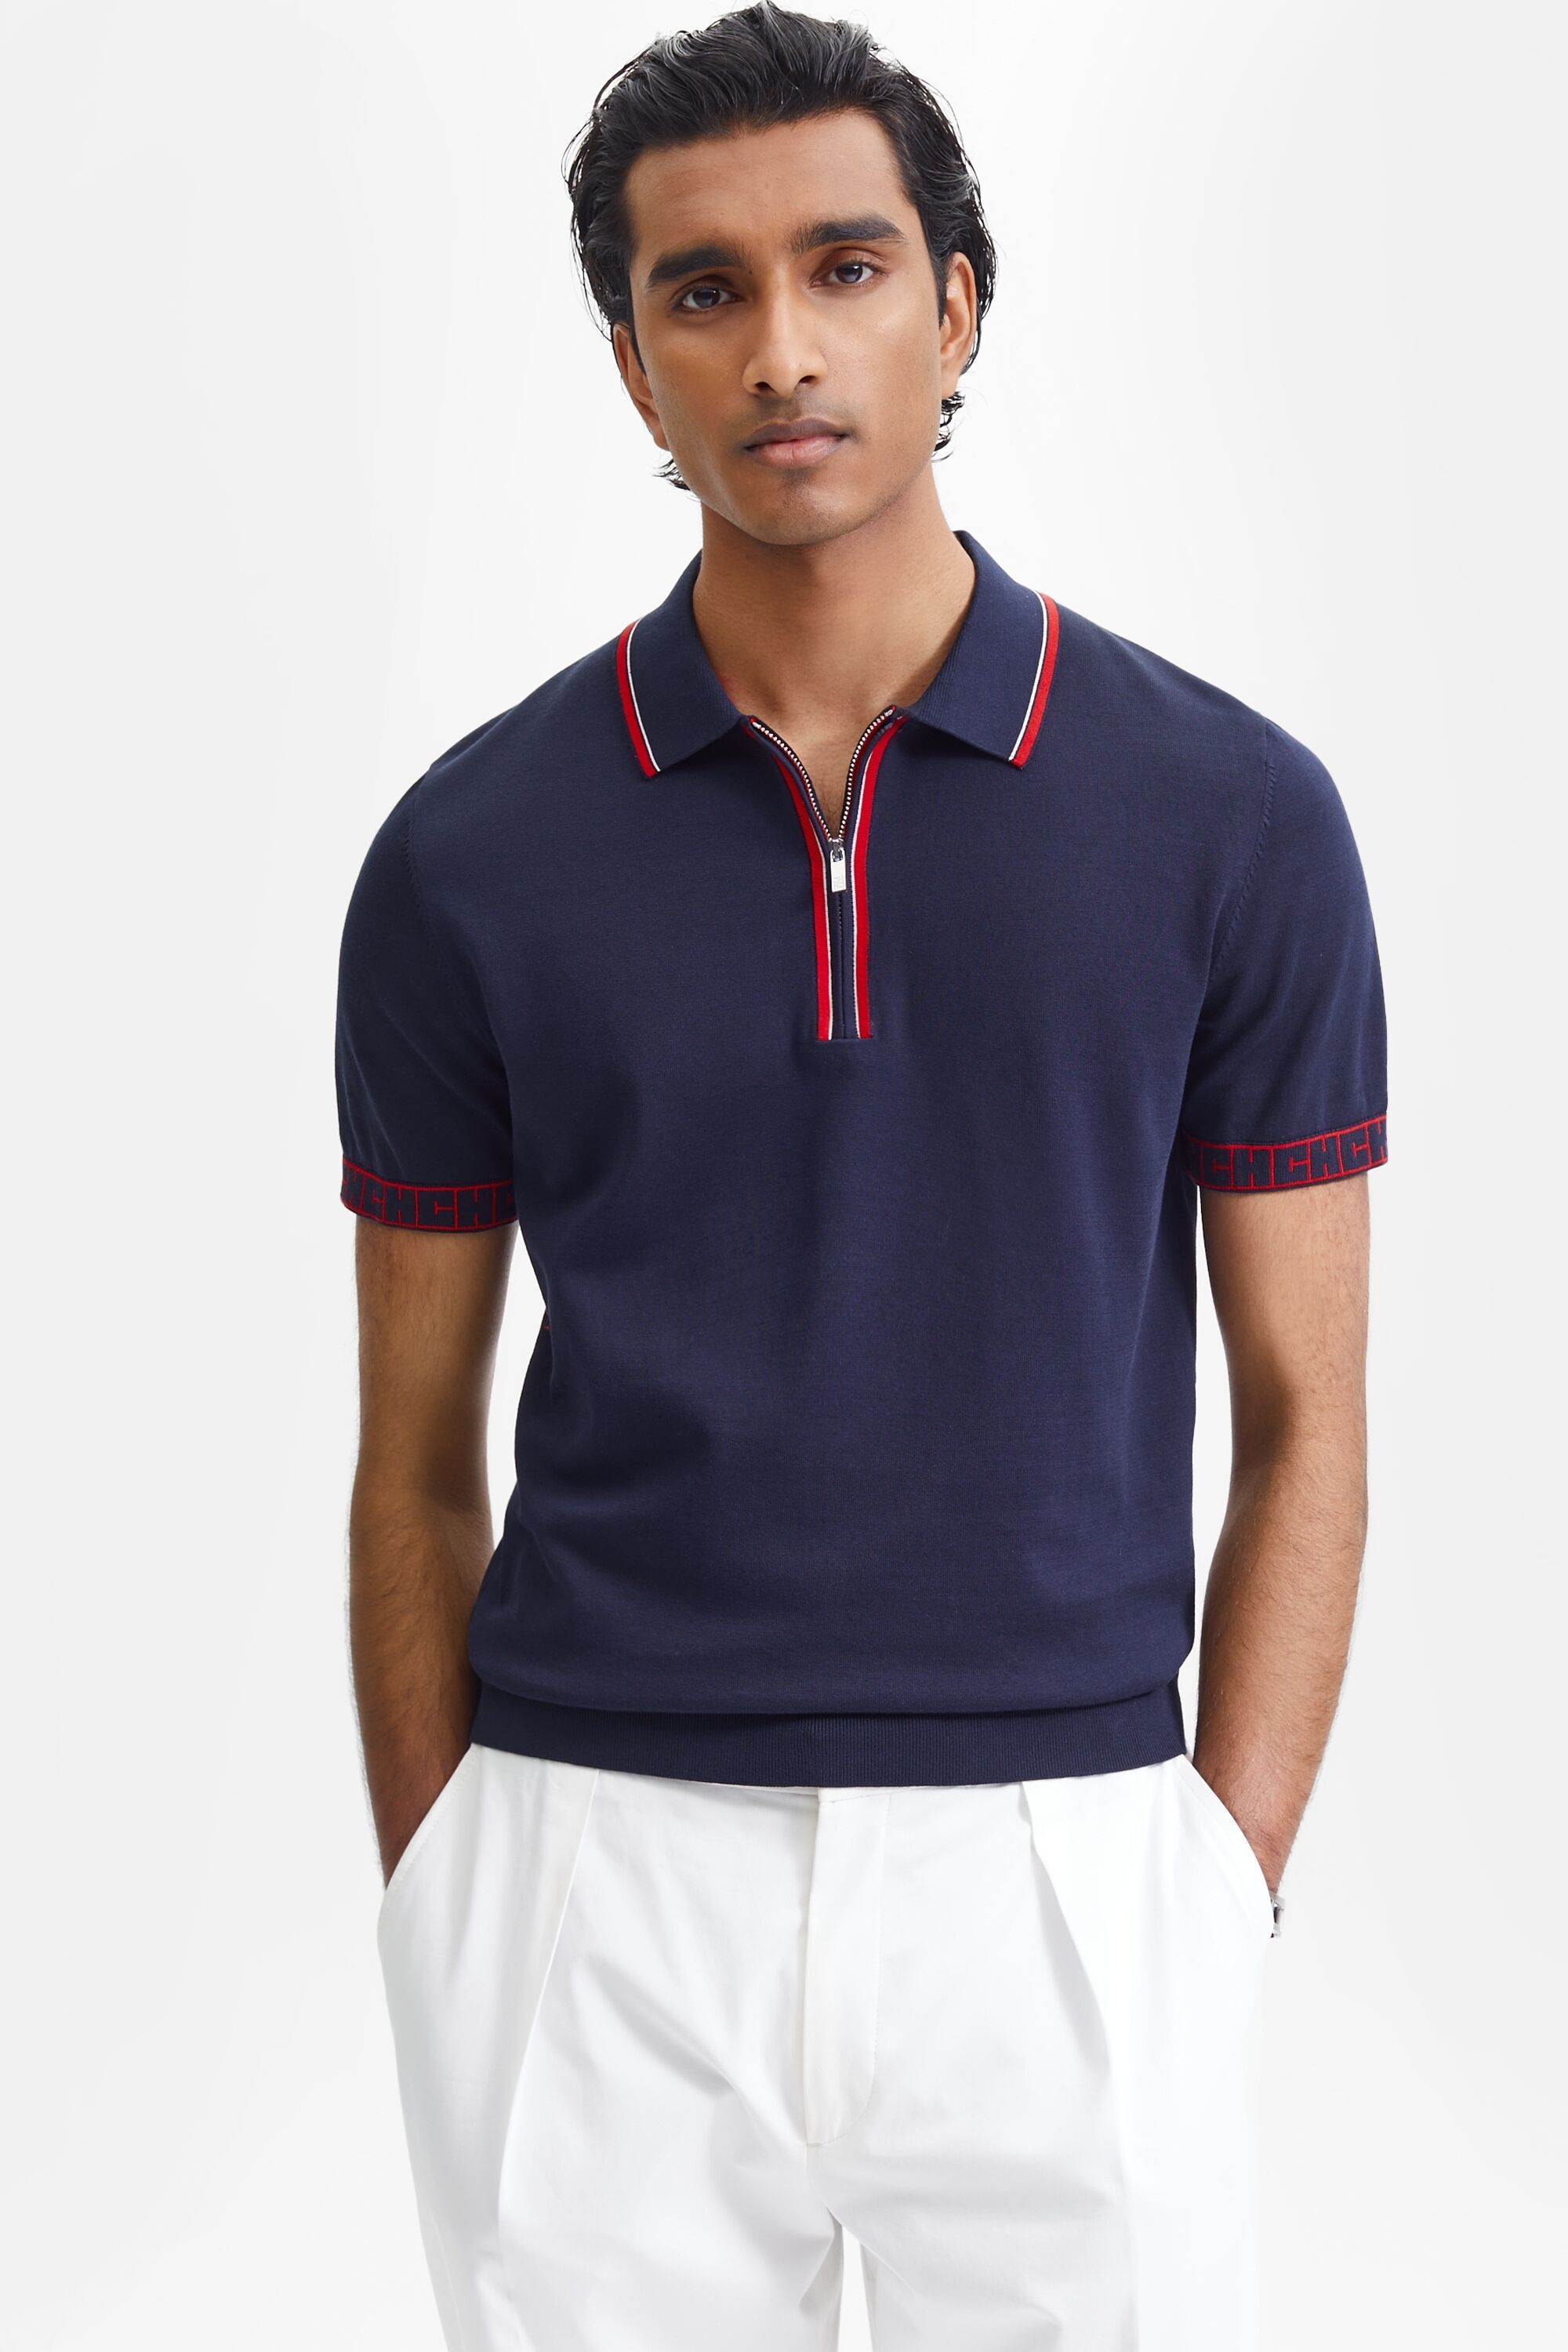 CH 2020 intarsia gassed cotton polo shirt